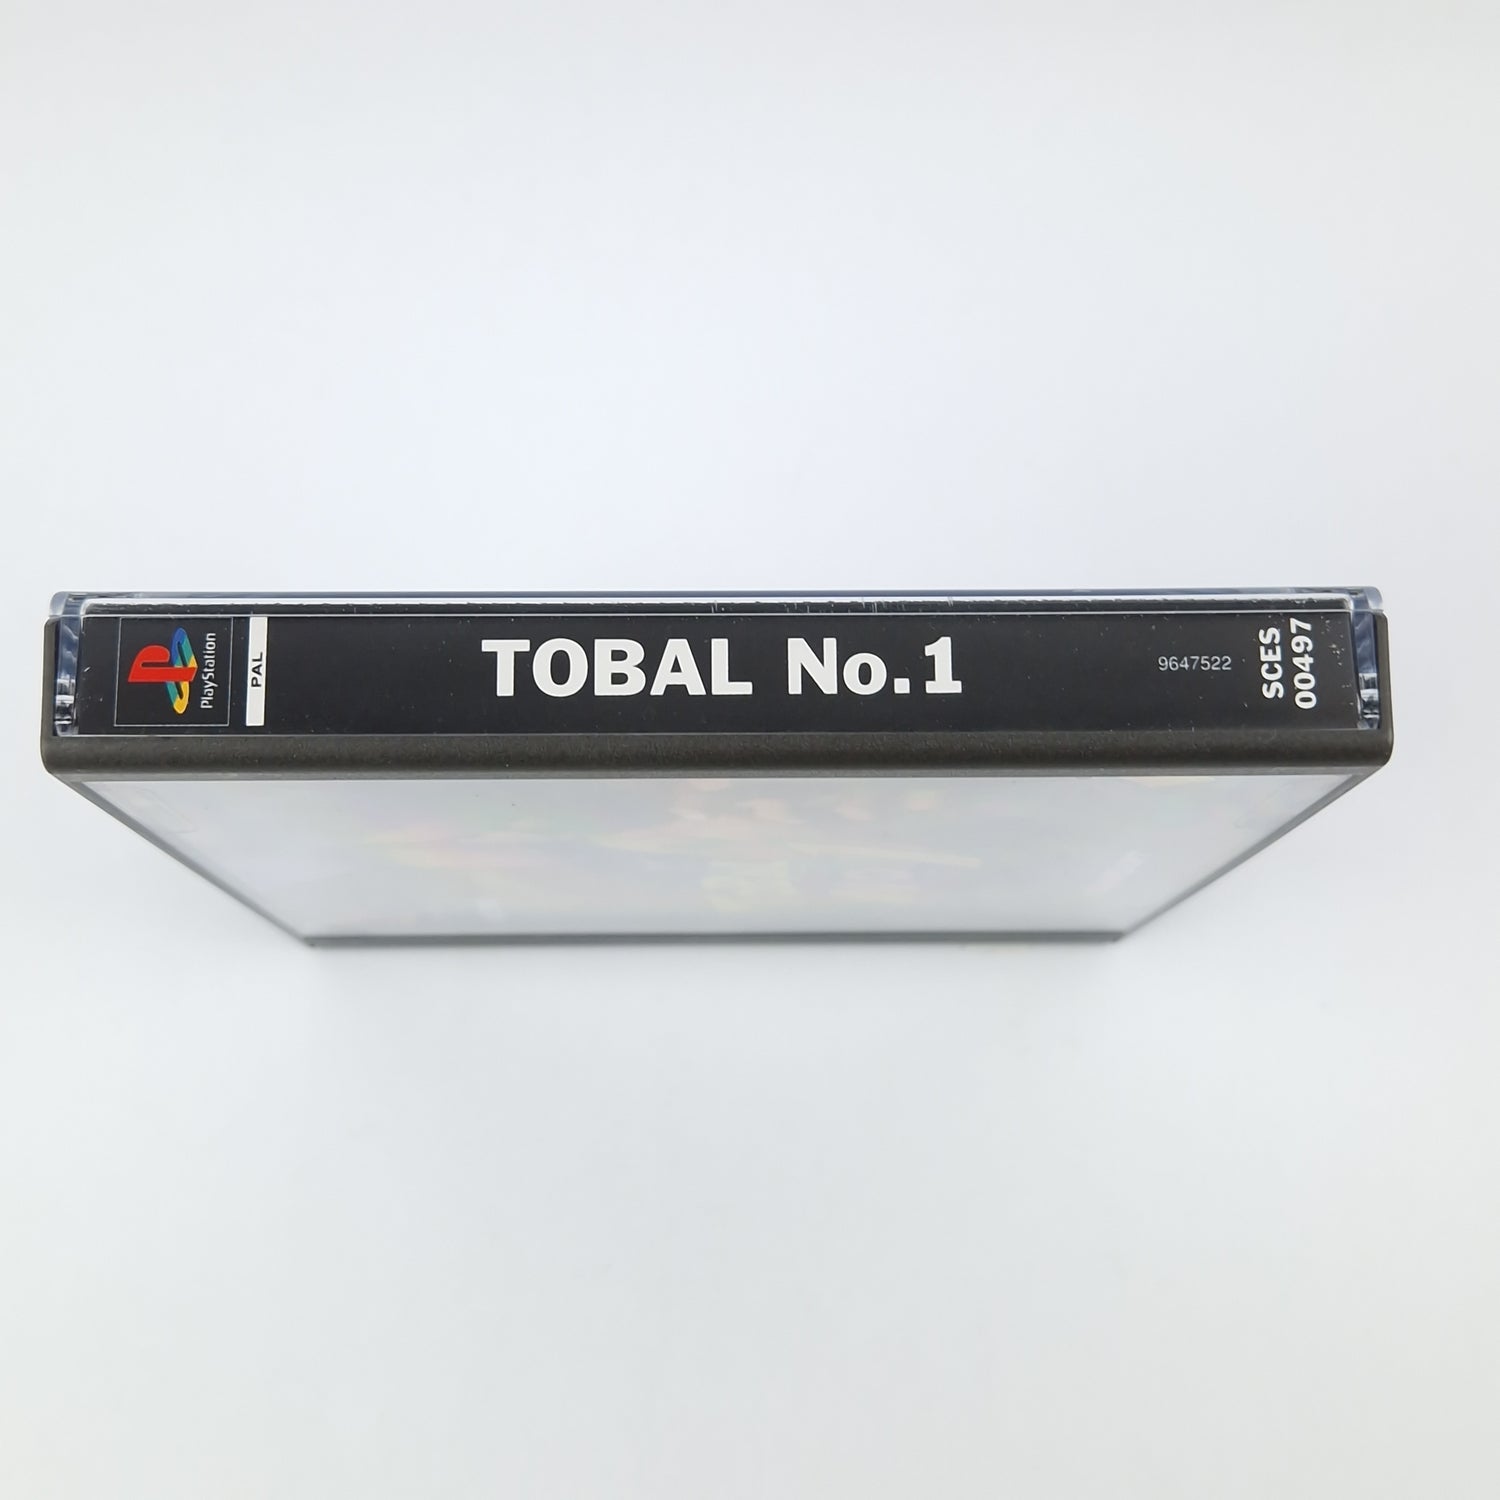 Playstation 1 game: Tobal No. 1 - CD instructions OVP | SONY PS1 PSX PAL